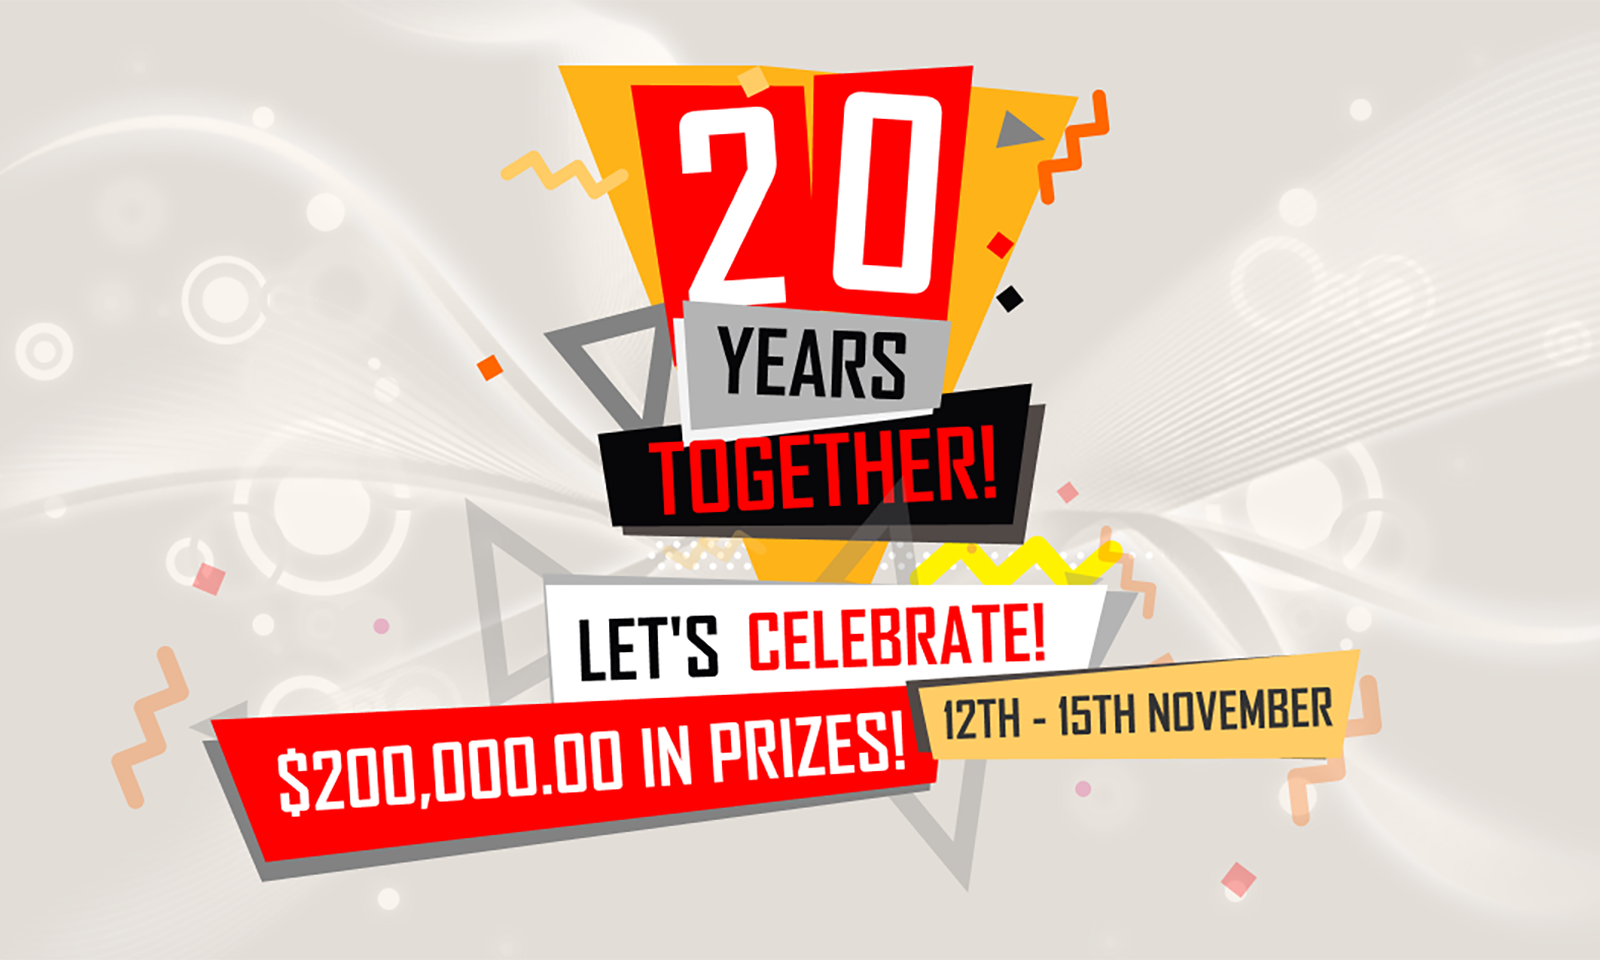 CamContacts Offering $200K in Prizes During Anniversary Contest